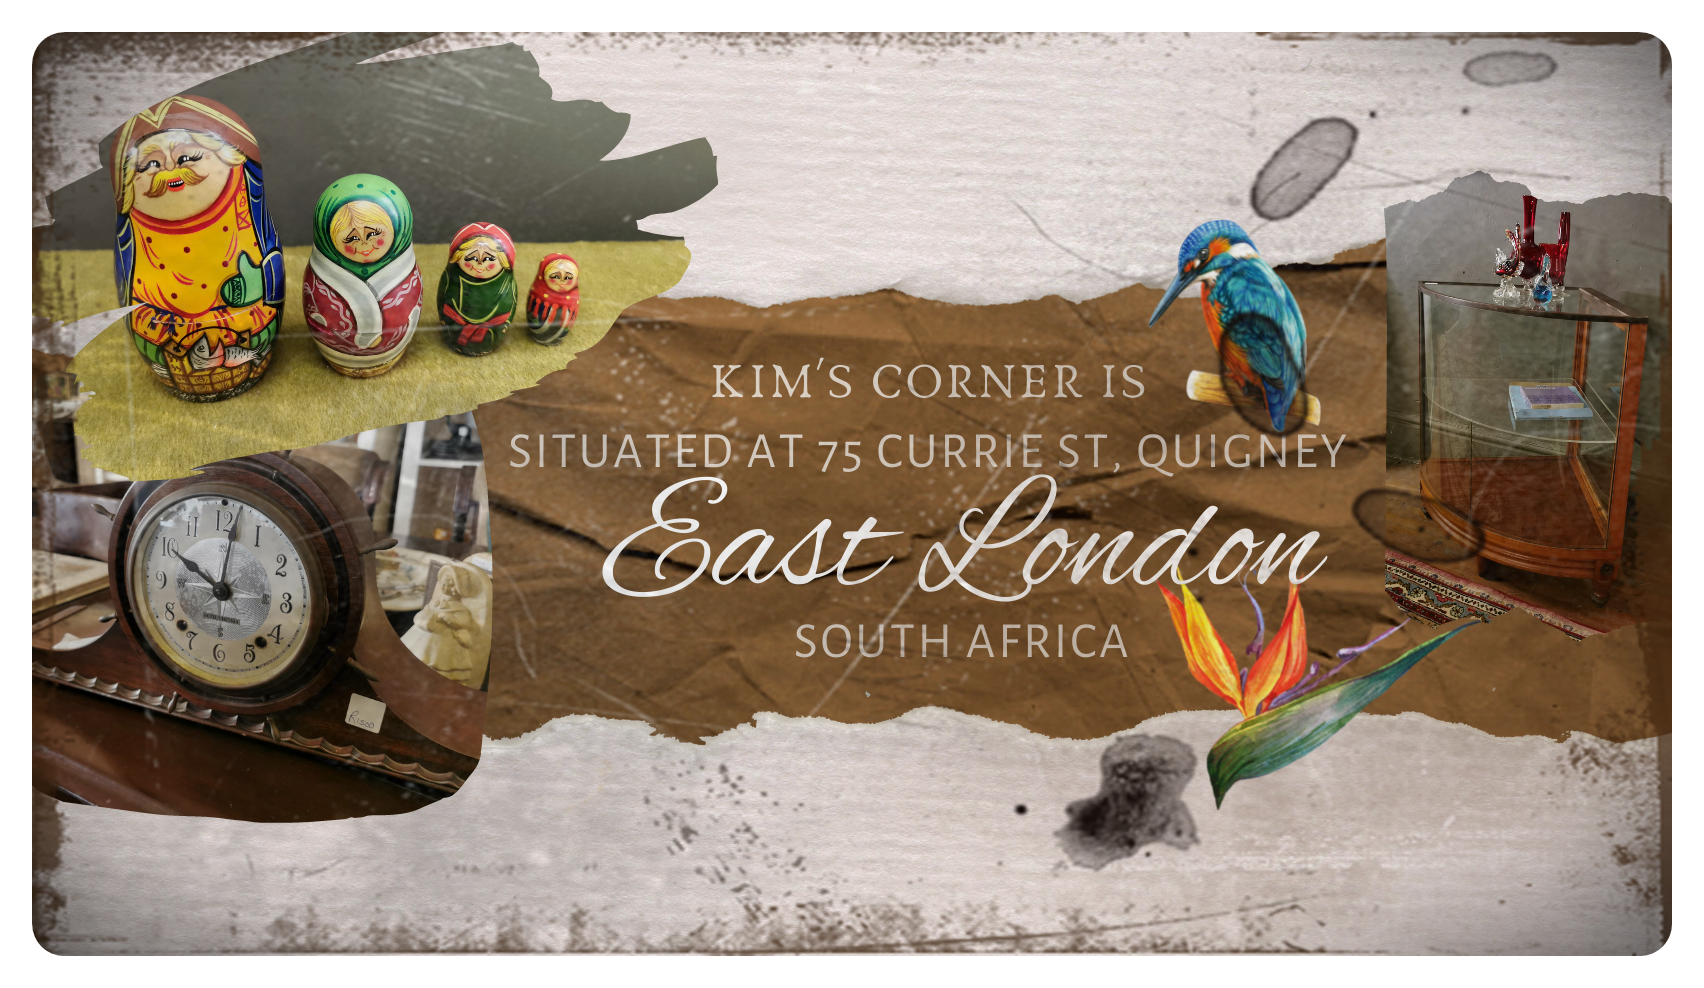 Kim's Corner is situated in East London, South Africa. Visit our showroom at 75 Currie St, Quigney. 